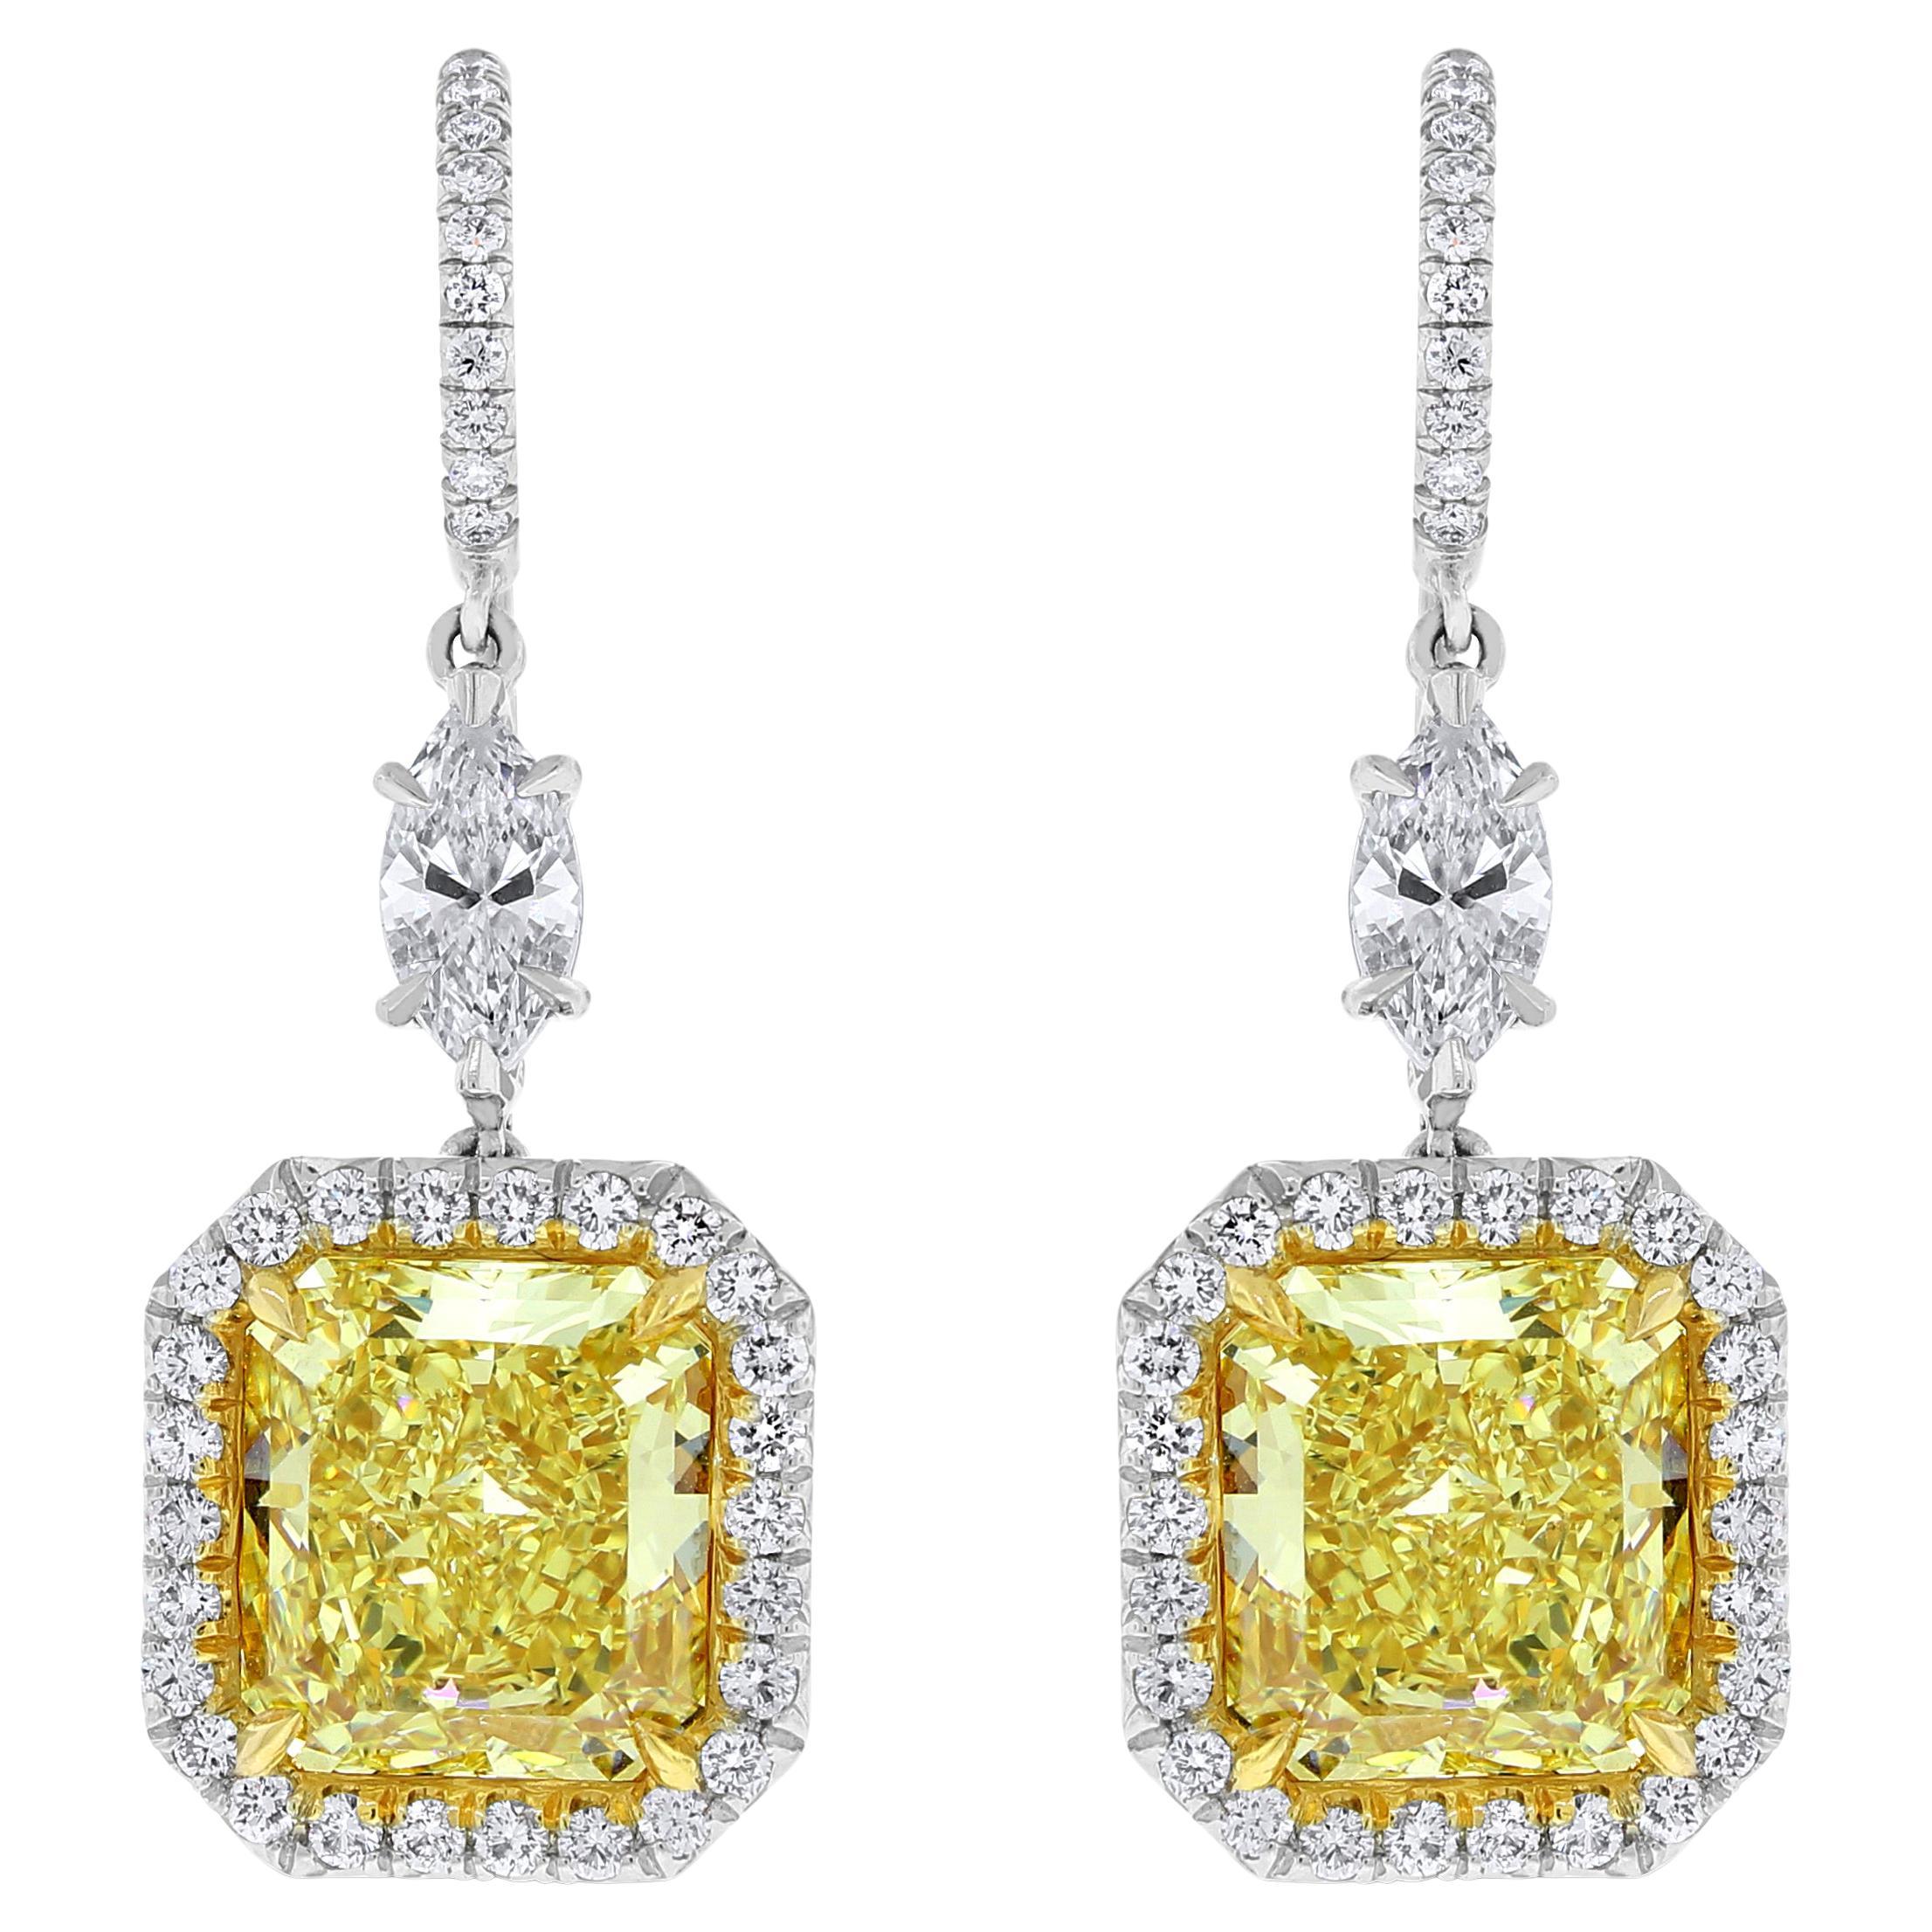 Beauvince Exuberance Earrings 8.47 Carat Radiant Fancy Yellow If GIA Diamonds For Sale